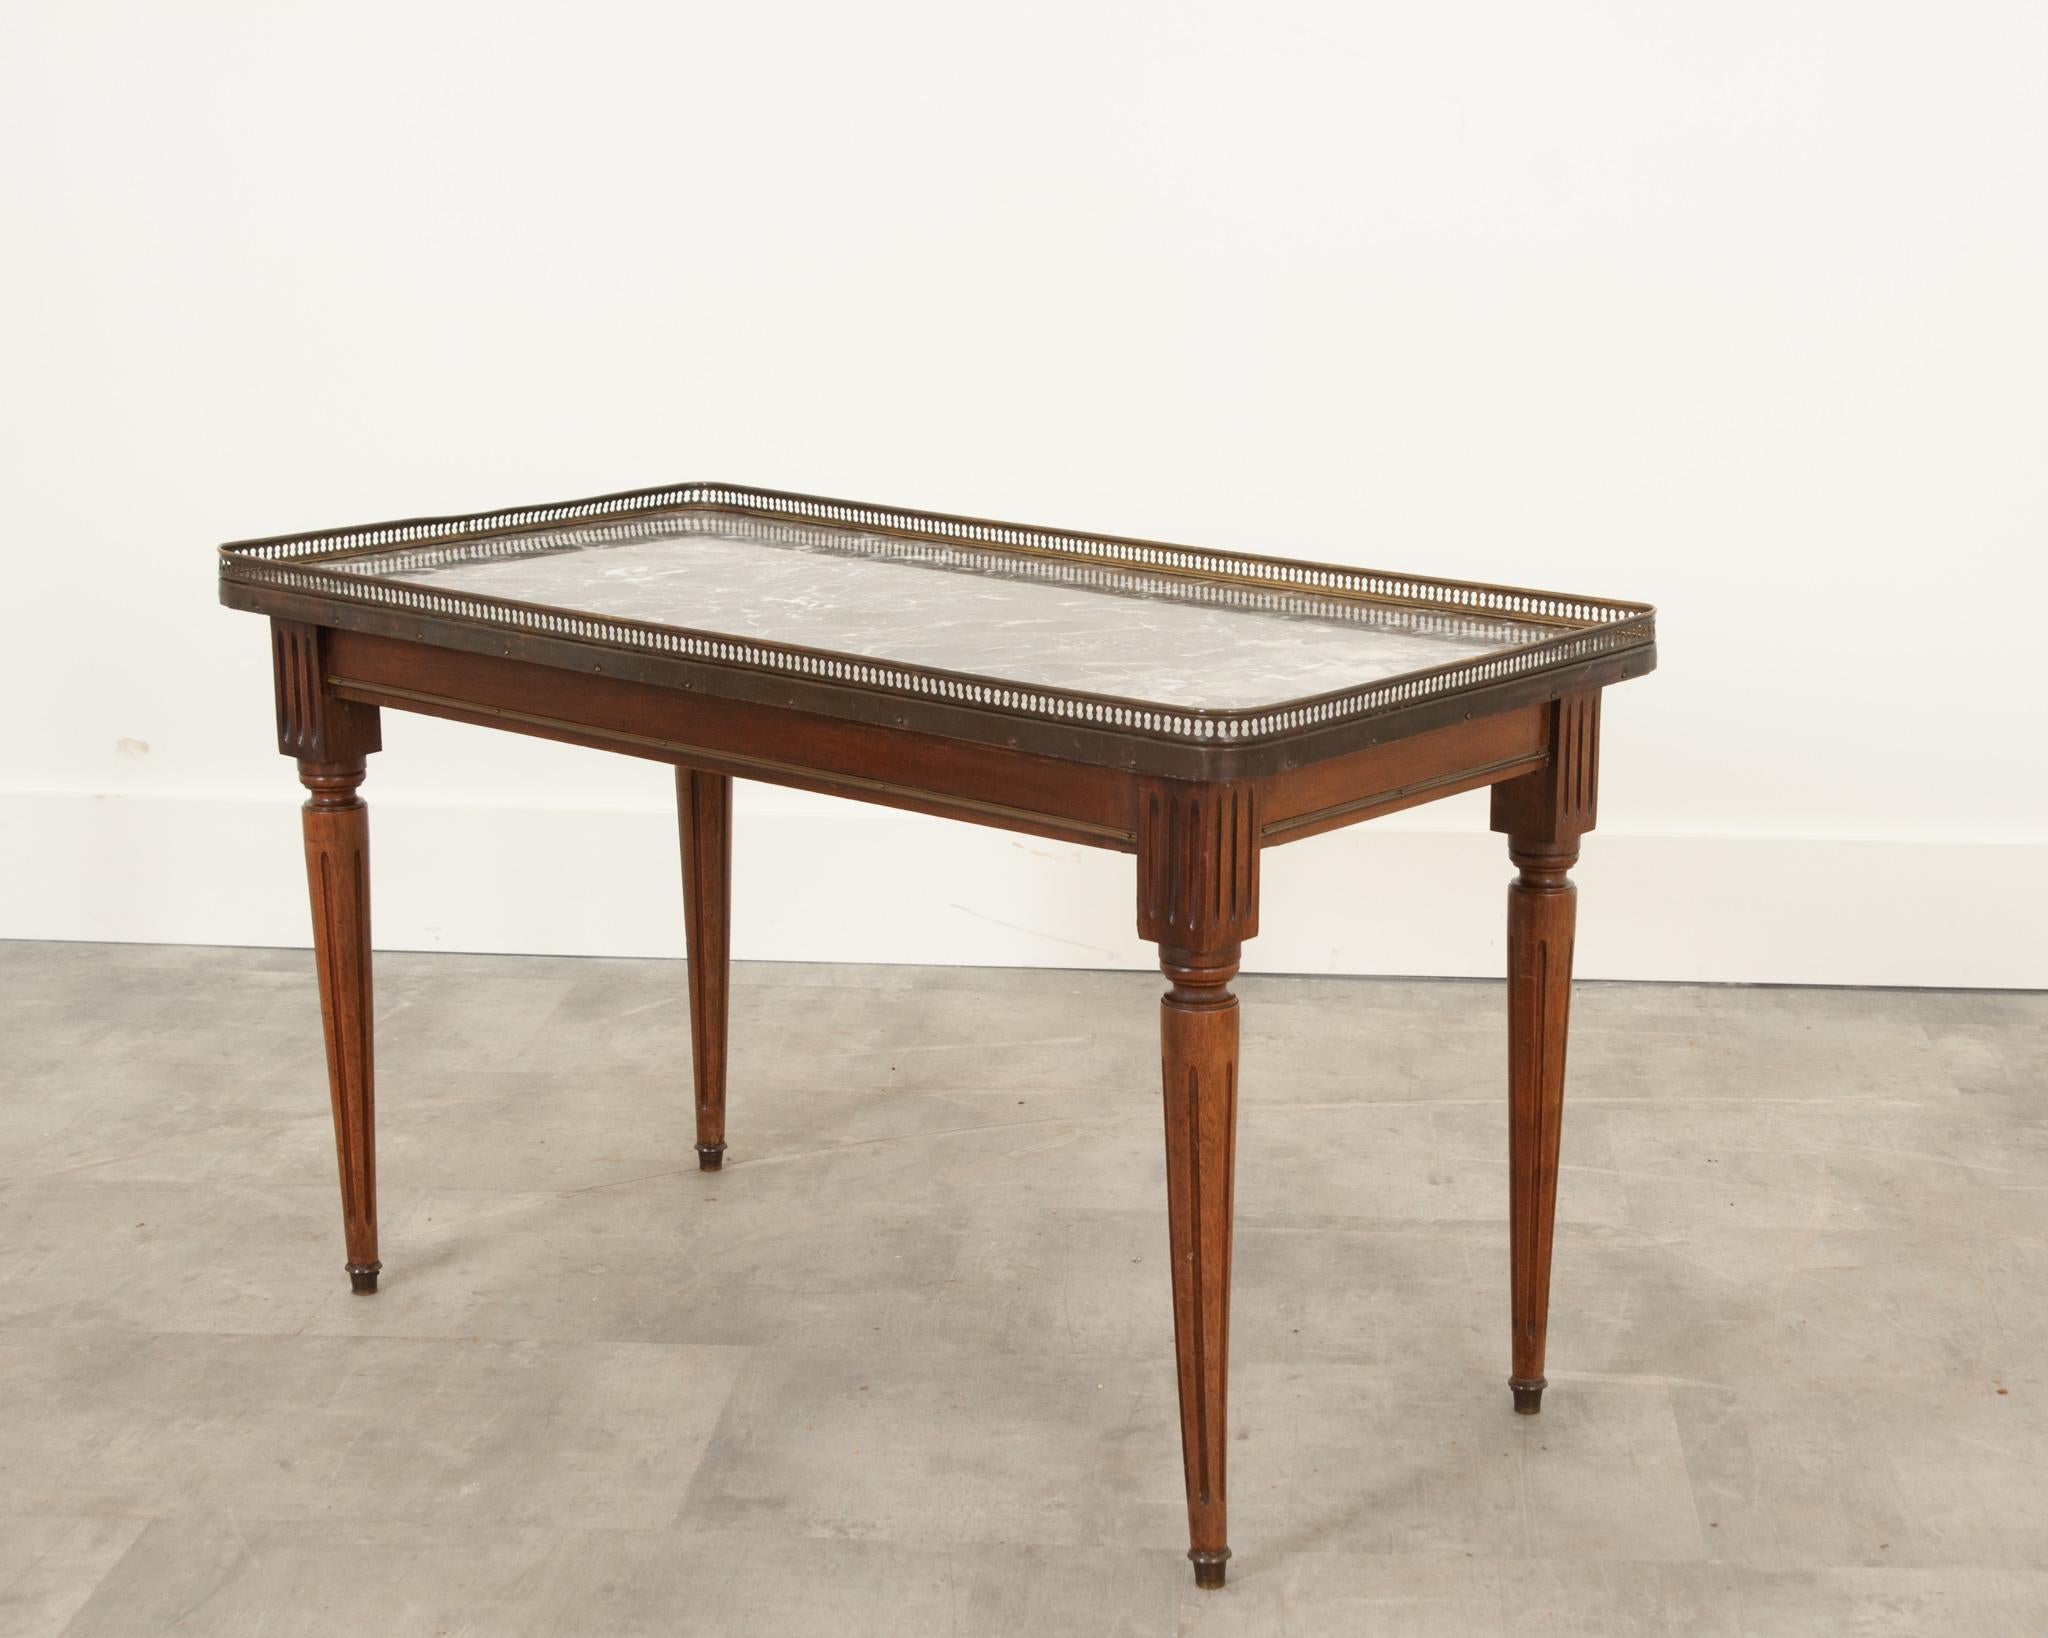 French coffee table in the Louis XVI style. A simple pierced brass gallery surrounds the inset charcoal & white marble top which has been repaired, please be sure to view the detailed images. The base is made of mahogany with brass accents. Great